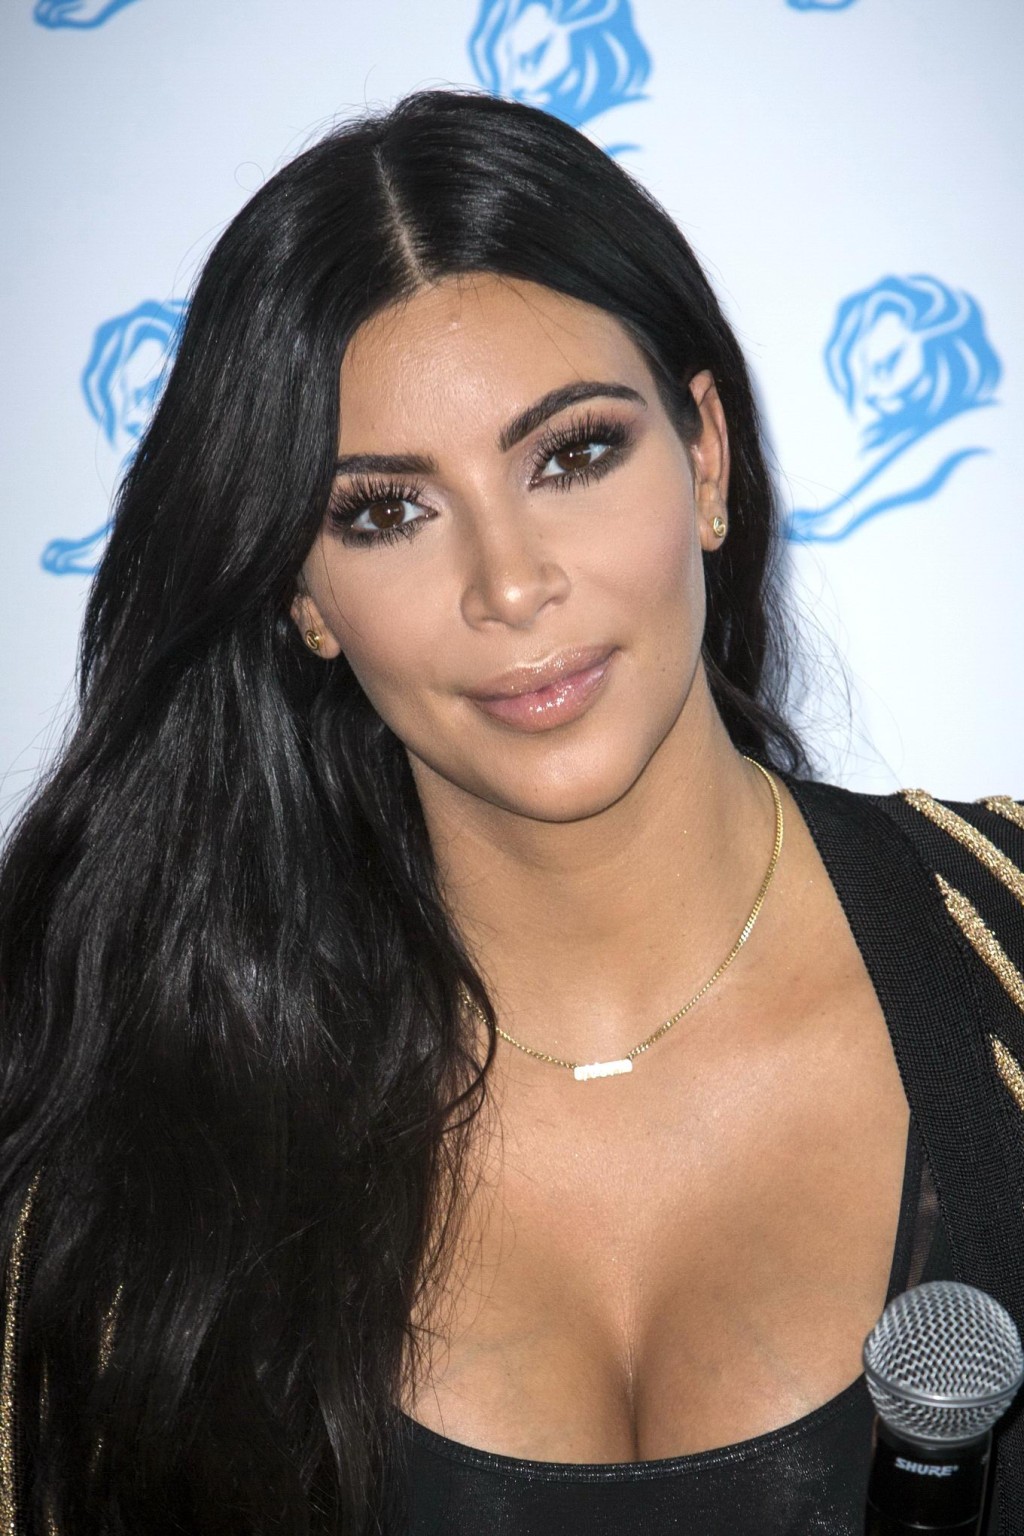 Kim Kardashian showing huge cleavage at the Cannes Lions event #75160418